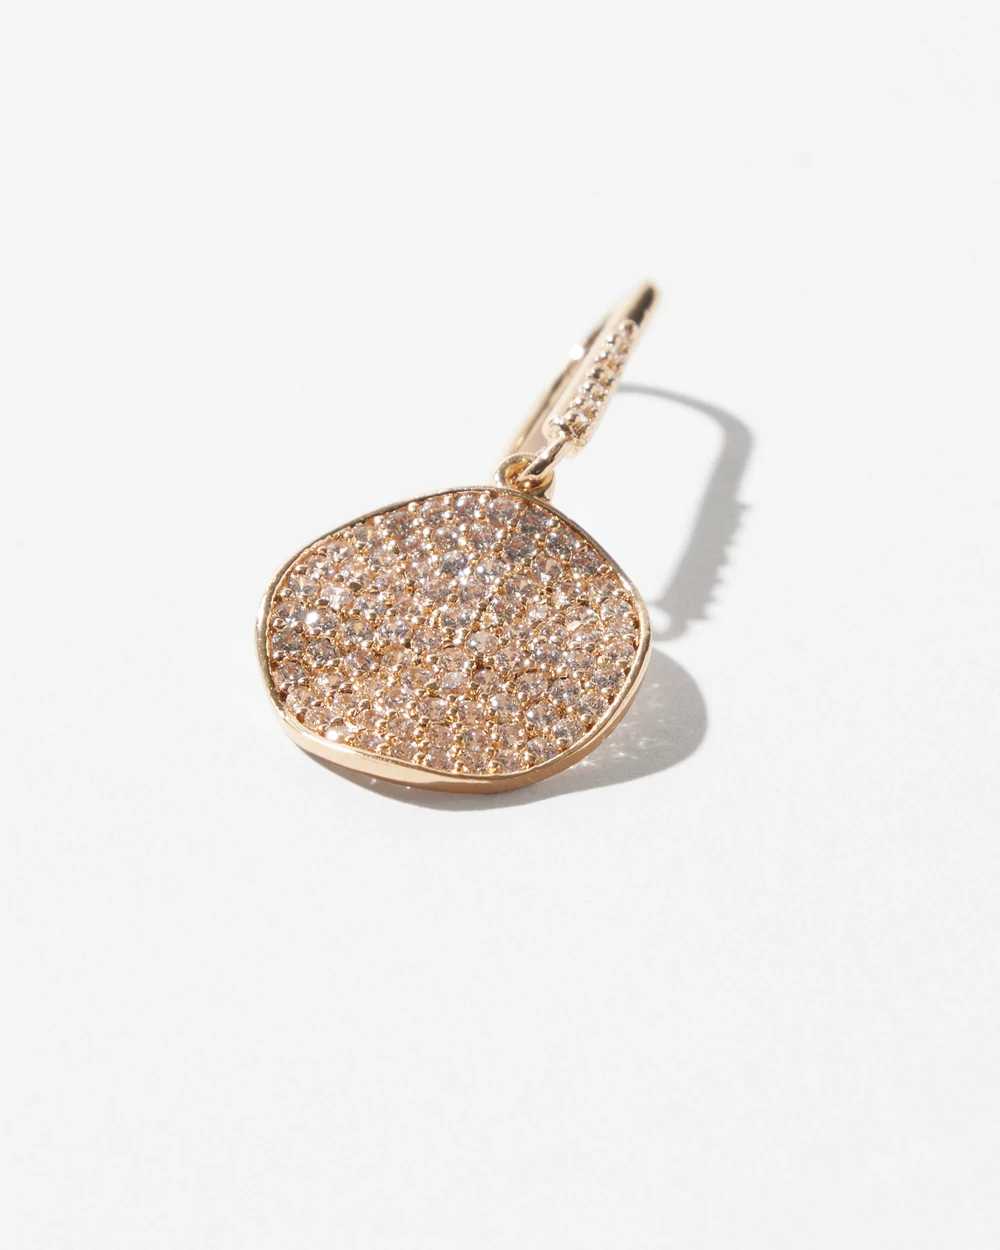 Gold Pave Disc Drop Earrings click to view larger image.